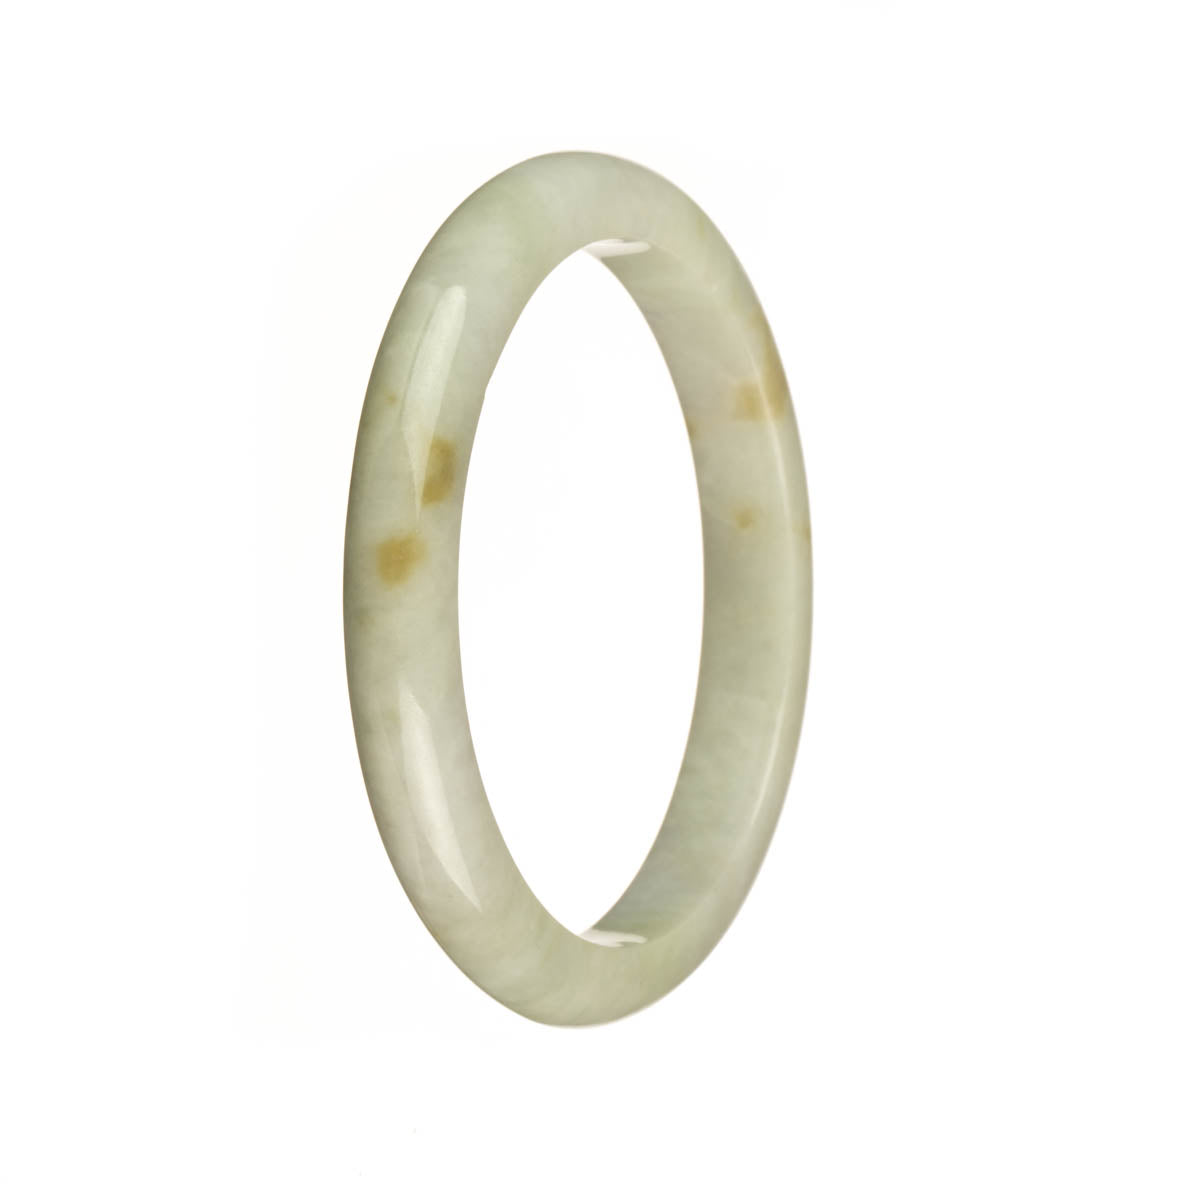 A close-up image of a traditional jade bracelet with a semi-round shape. The bracelet is made of genuine grade A white jade with brown spots. The size of the bracelet is 56mm. This piece of jewelry is offered by MAYS GEMS.